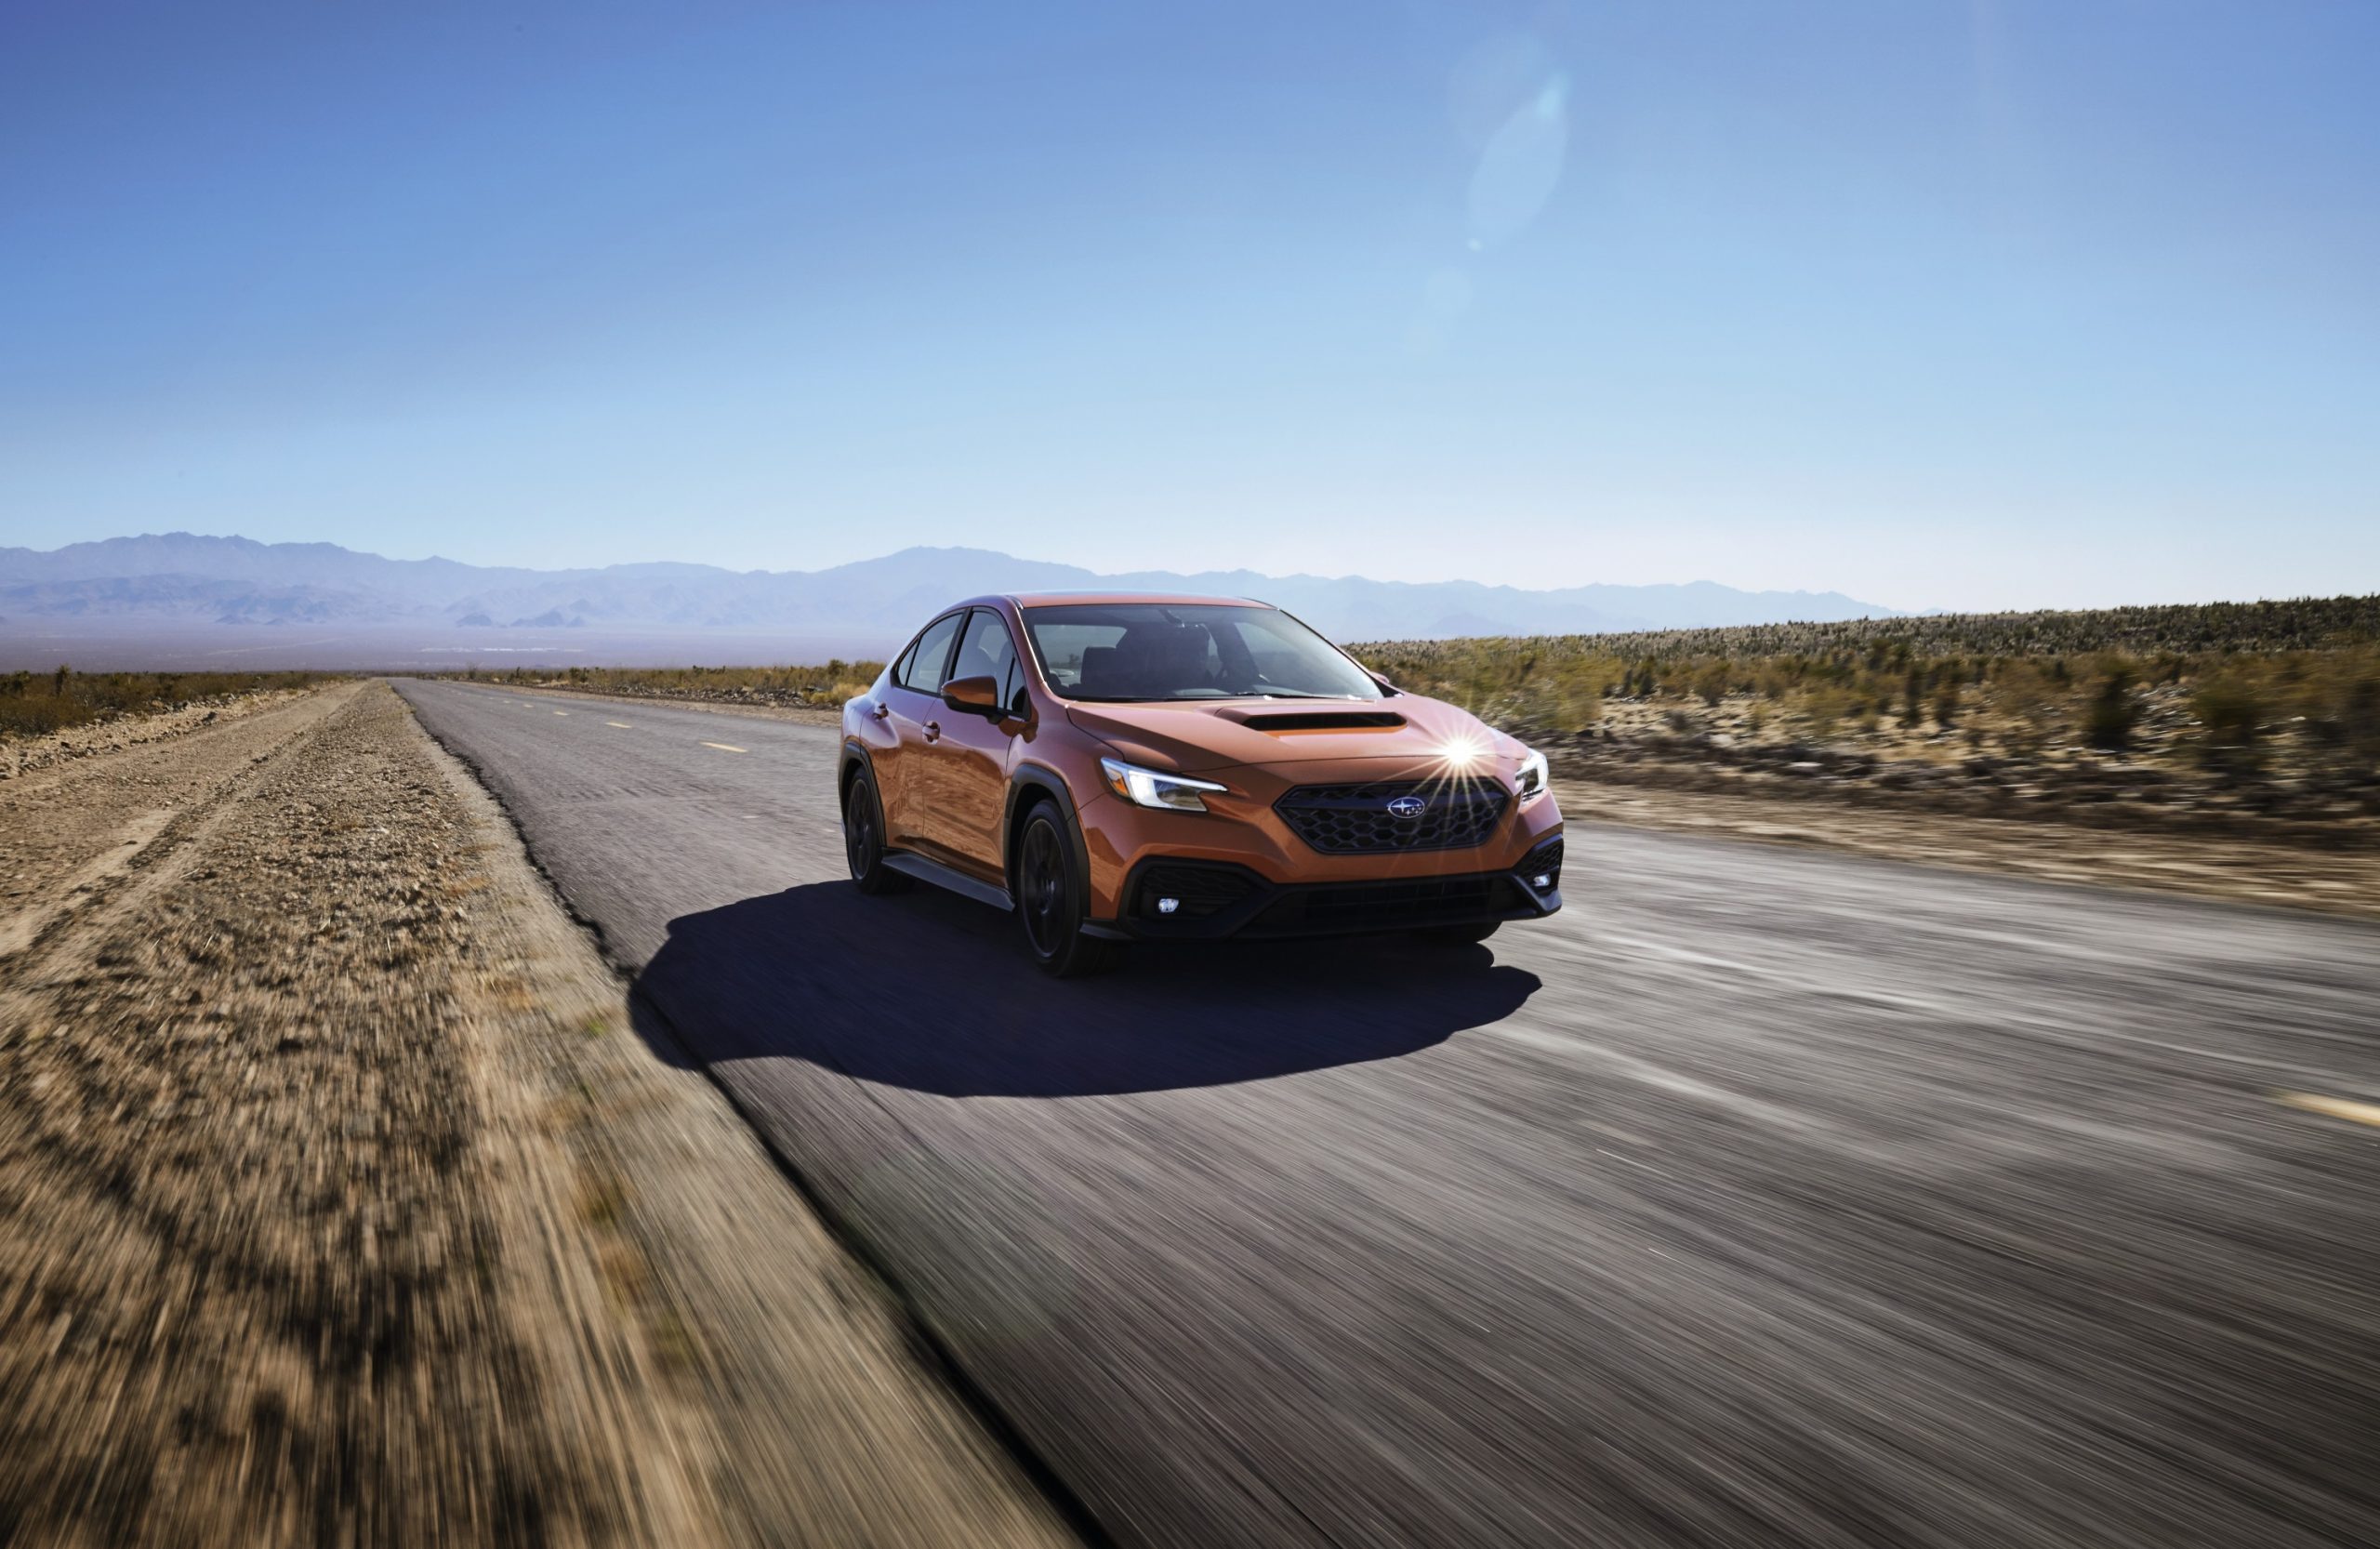 A 2022 Subaru WRX in orange shot blasting down a desert road from the front 3/4